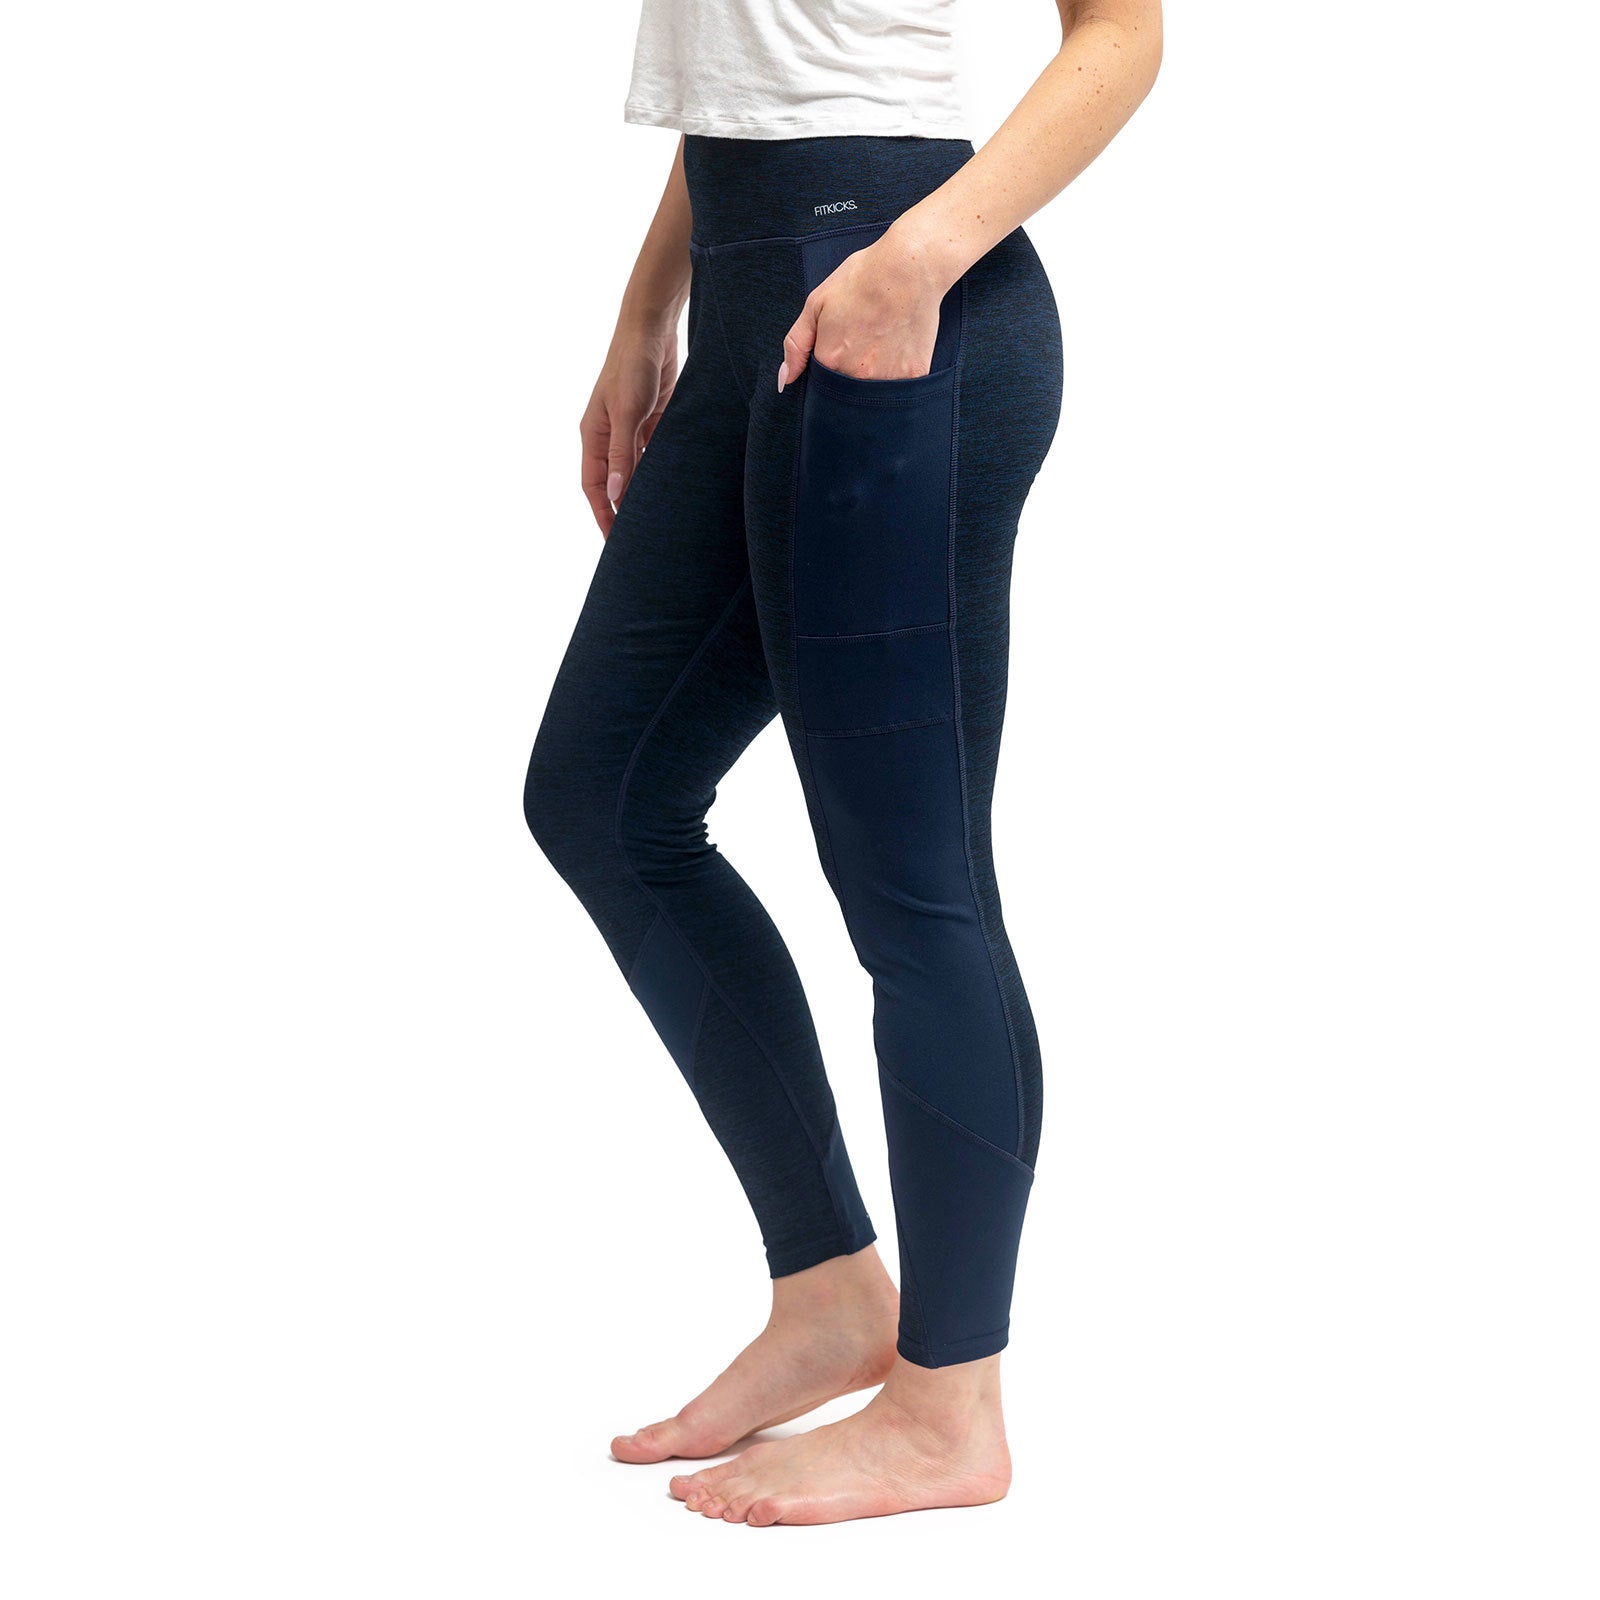 FITKICKS Crossover Legging Colorblocked Collection - Thai-Me Spa